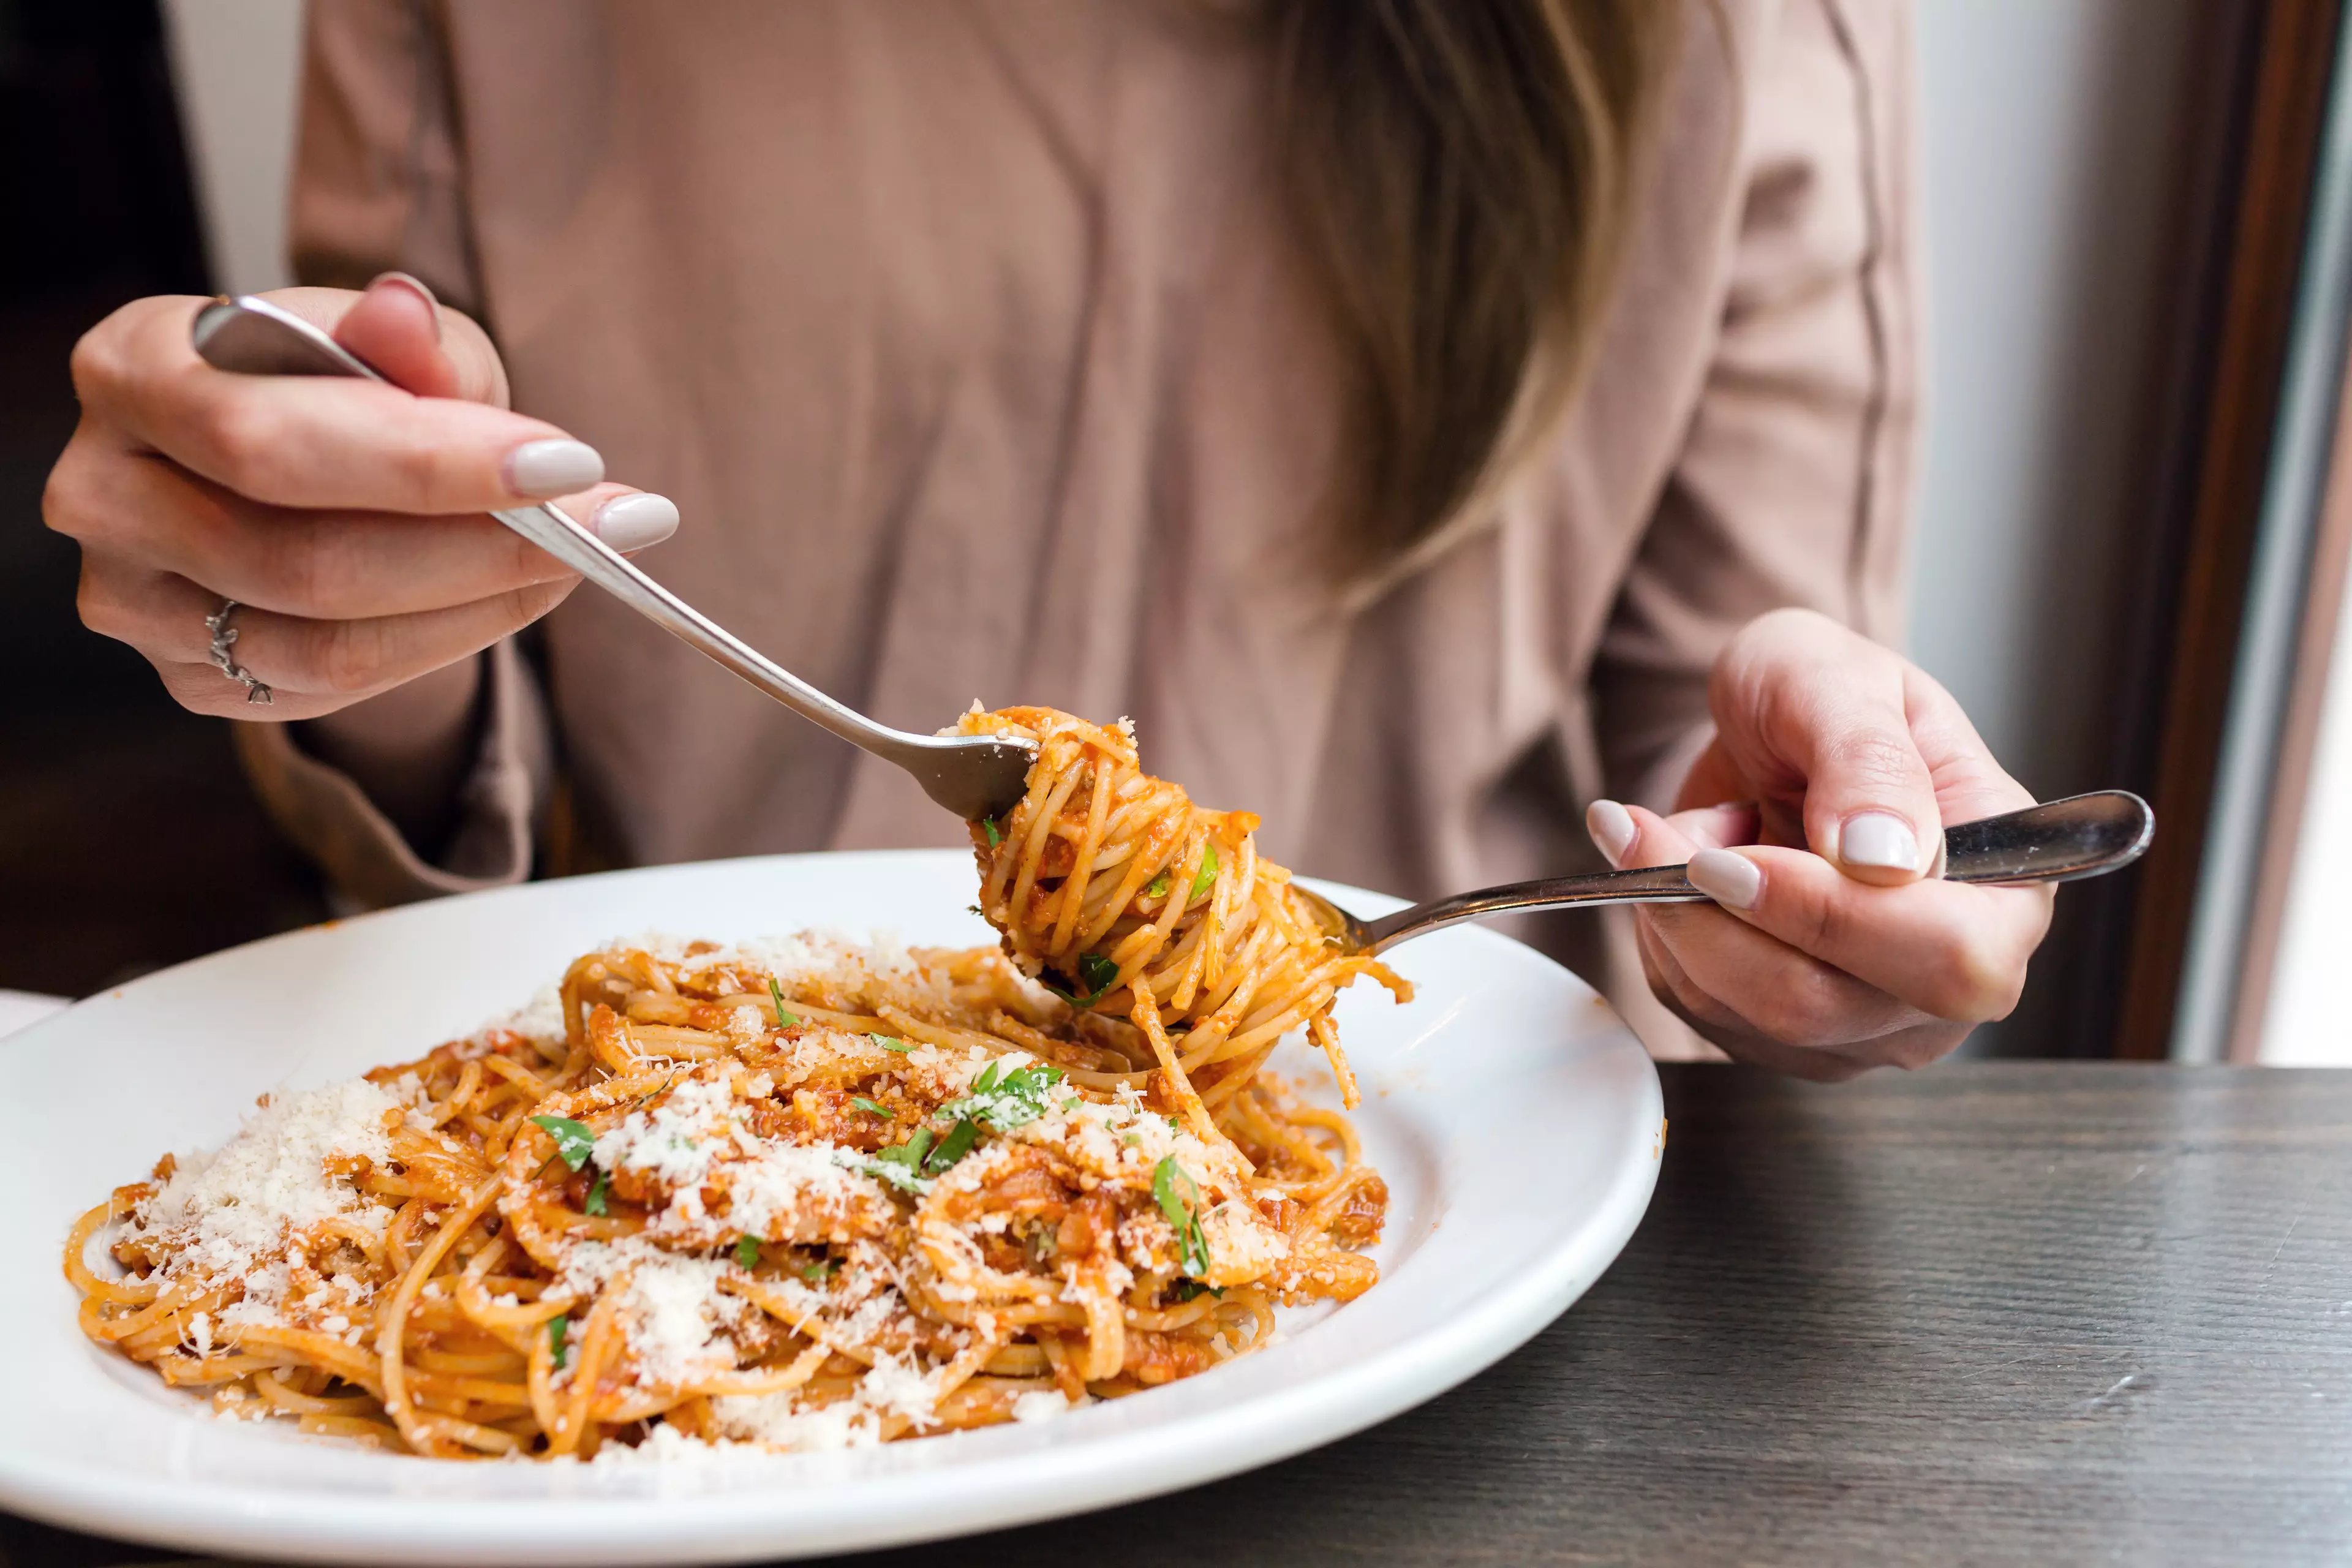 Pasta is a popular leftovers option for breakfast among millennials (